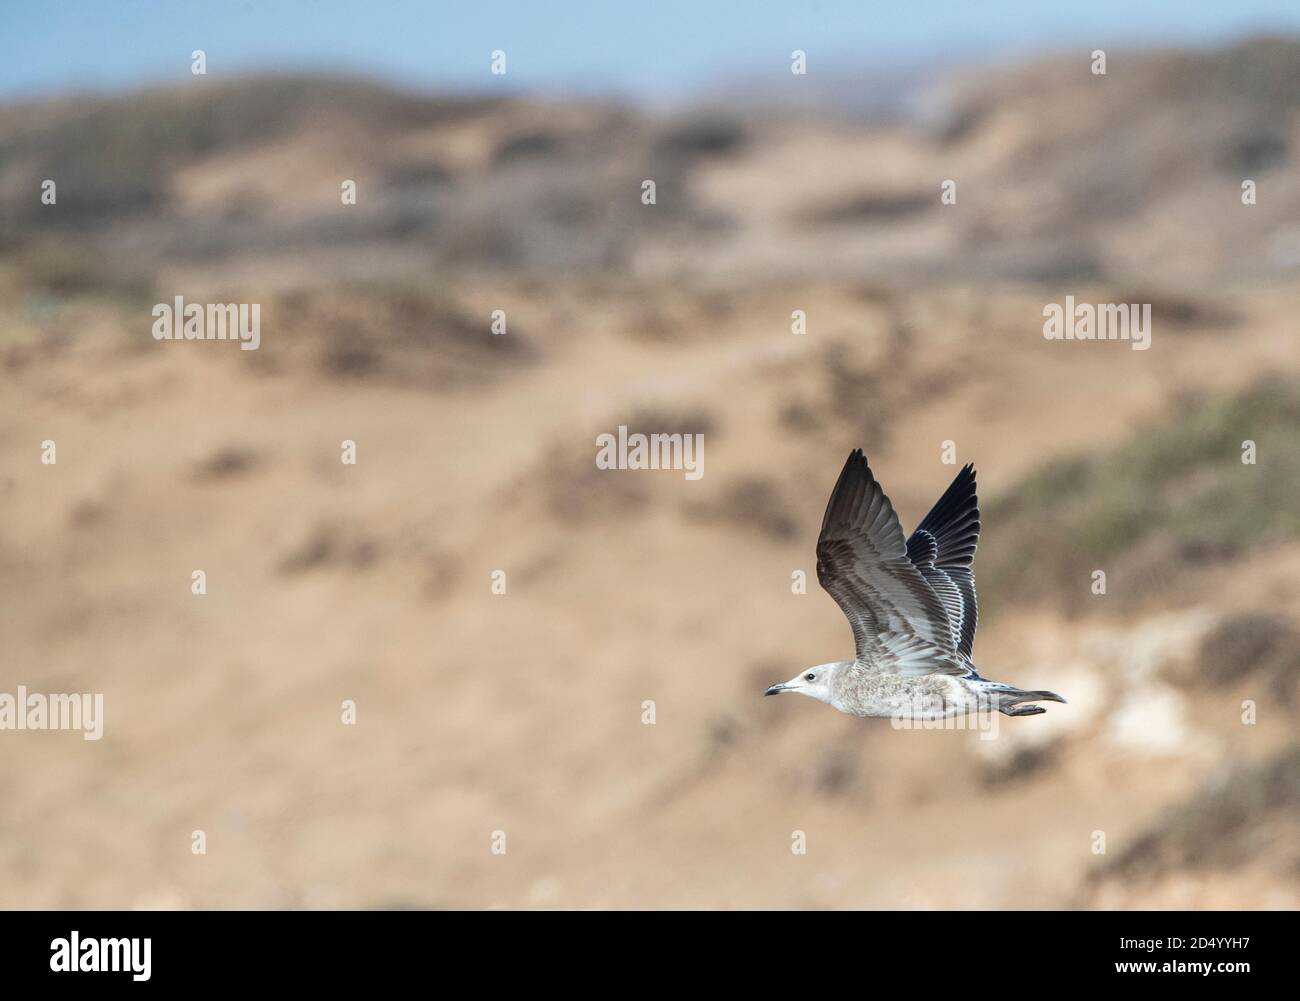 Audouin's gull (Larus audouinii, Ichthyaetus audouinii), Juvenile in flight over the dunes, showing under wing pattern, Morocco Stock Photo